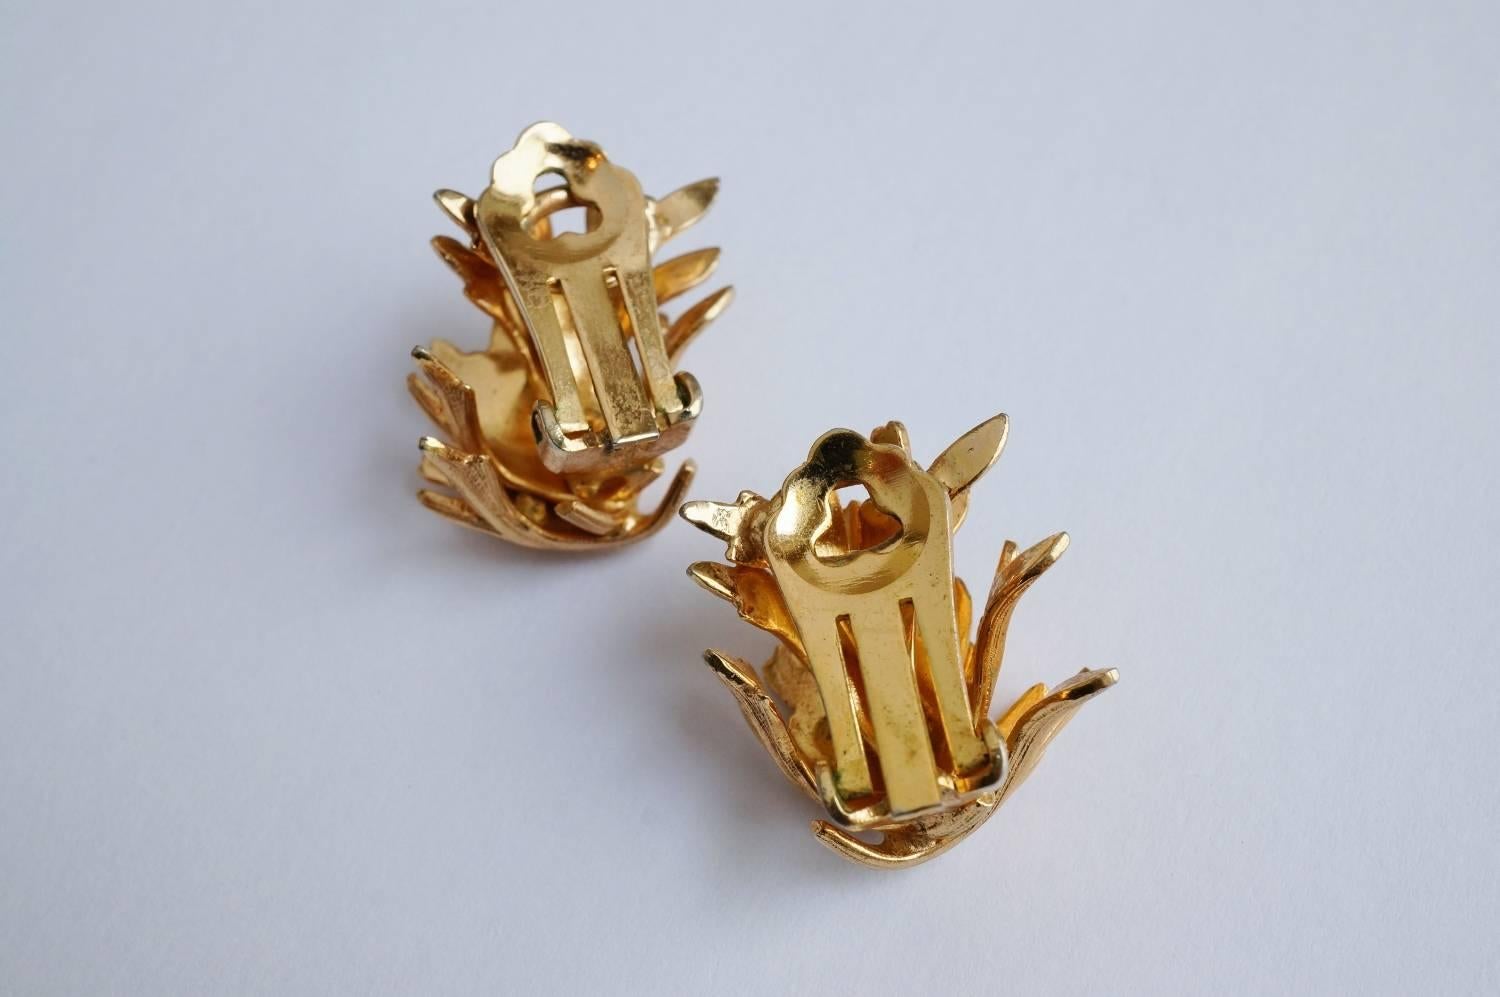 Grosse earrings leaf pattern, gilt, 1964, Germany.

These vintage Grosse earrings are clip ons which can be converted for pierced ears. Each is stamped on the back of the clip Grosse © 1964 Germany along with the Grosse logo. Excellent condition.